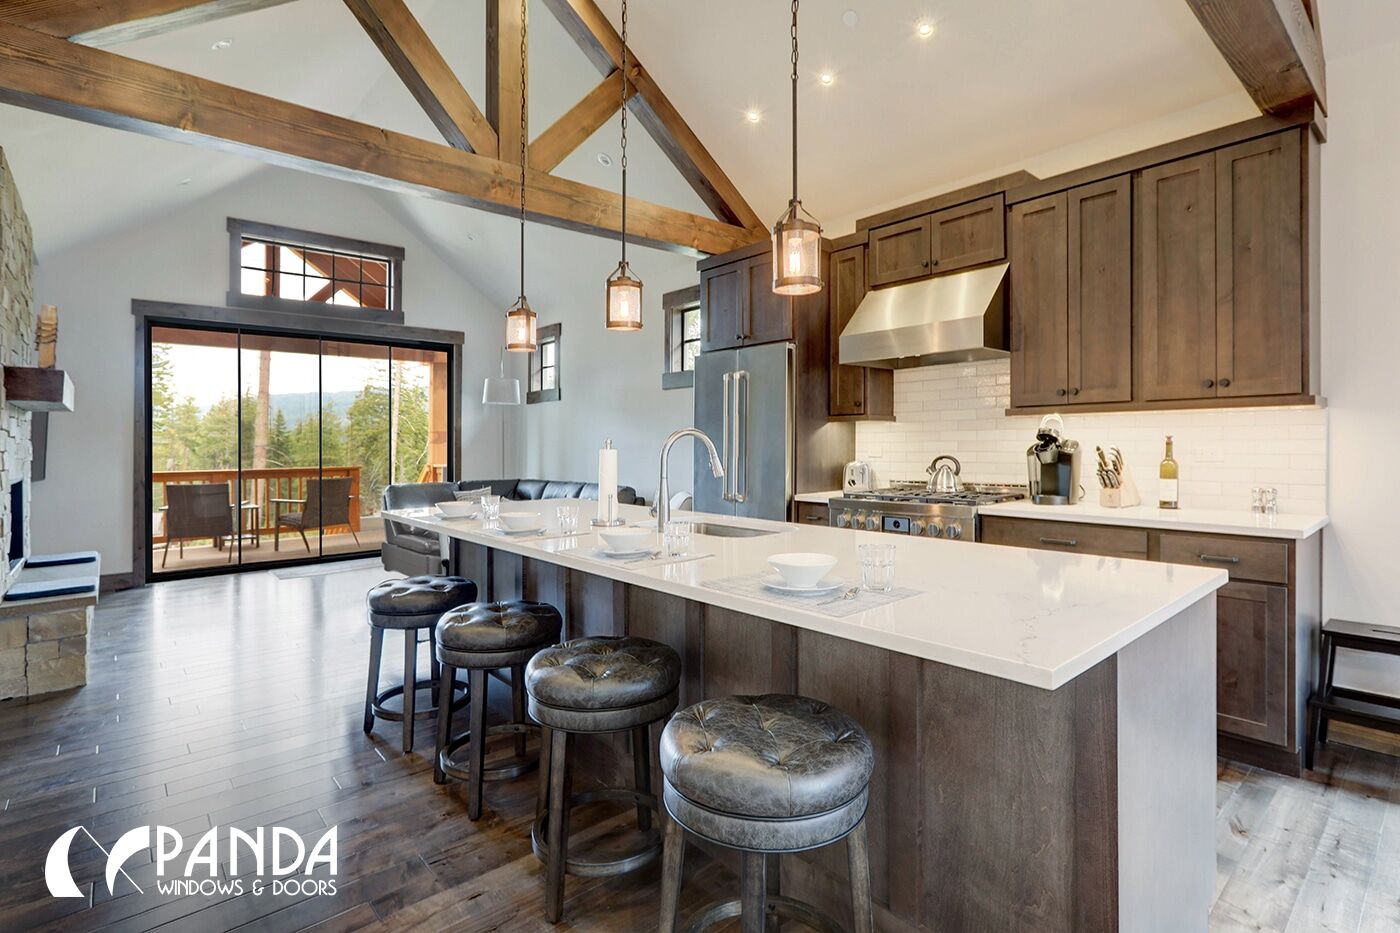 Barndo Kitchen Ideas: Transform Your Space with These Modern and Rustic Designs!